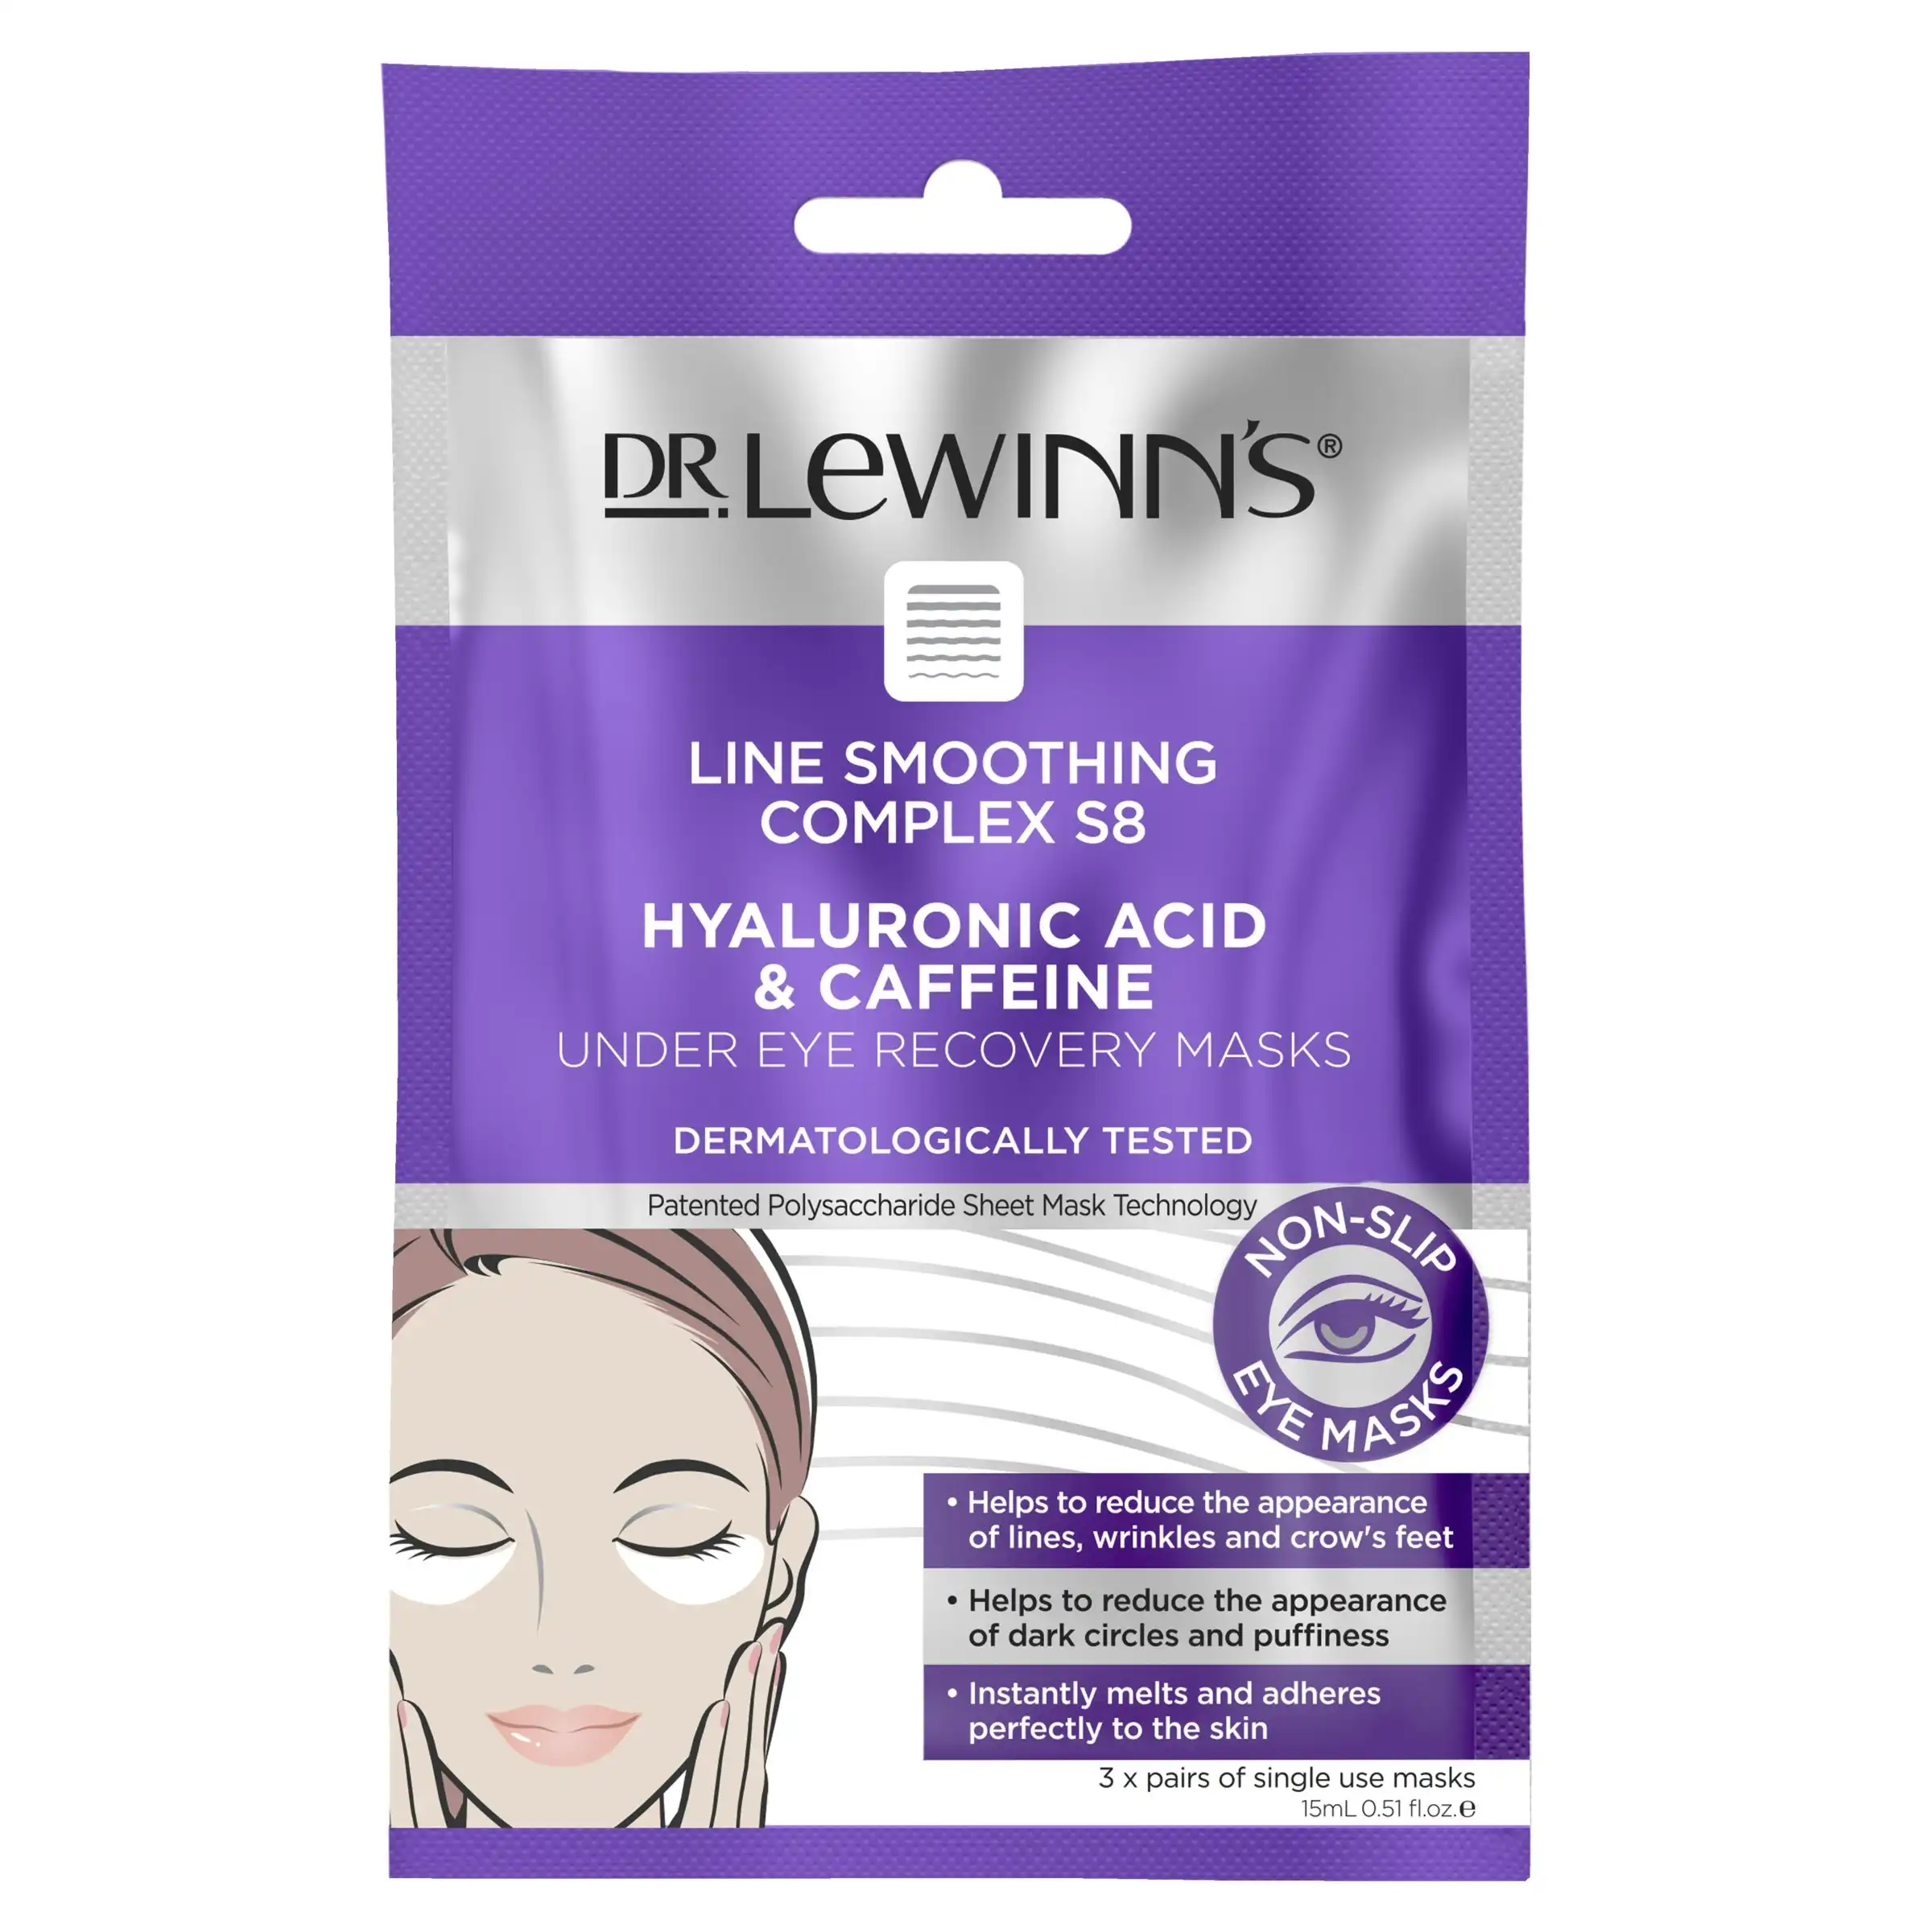 Dr LeWinn's Line Smoothing Complex Hyaluronic Acid & Caffeine Under Eye Recovery Masks 3 Pairs